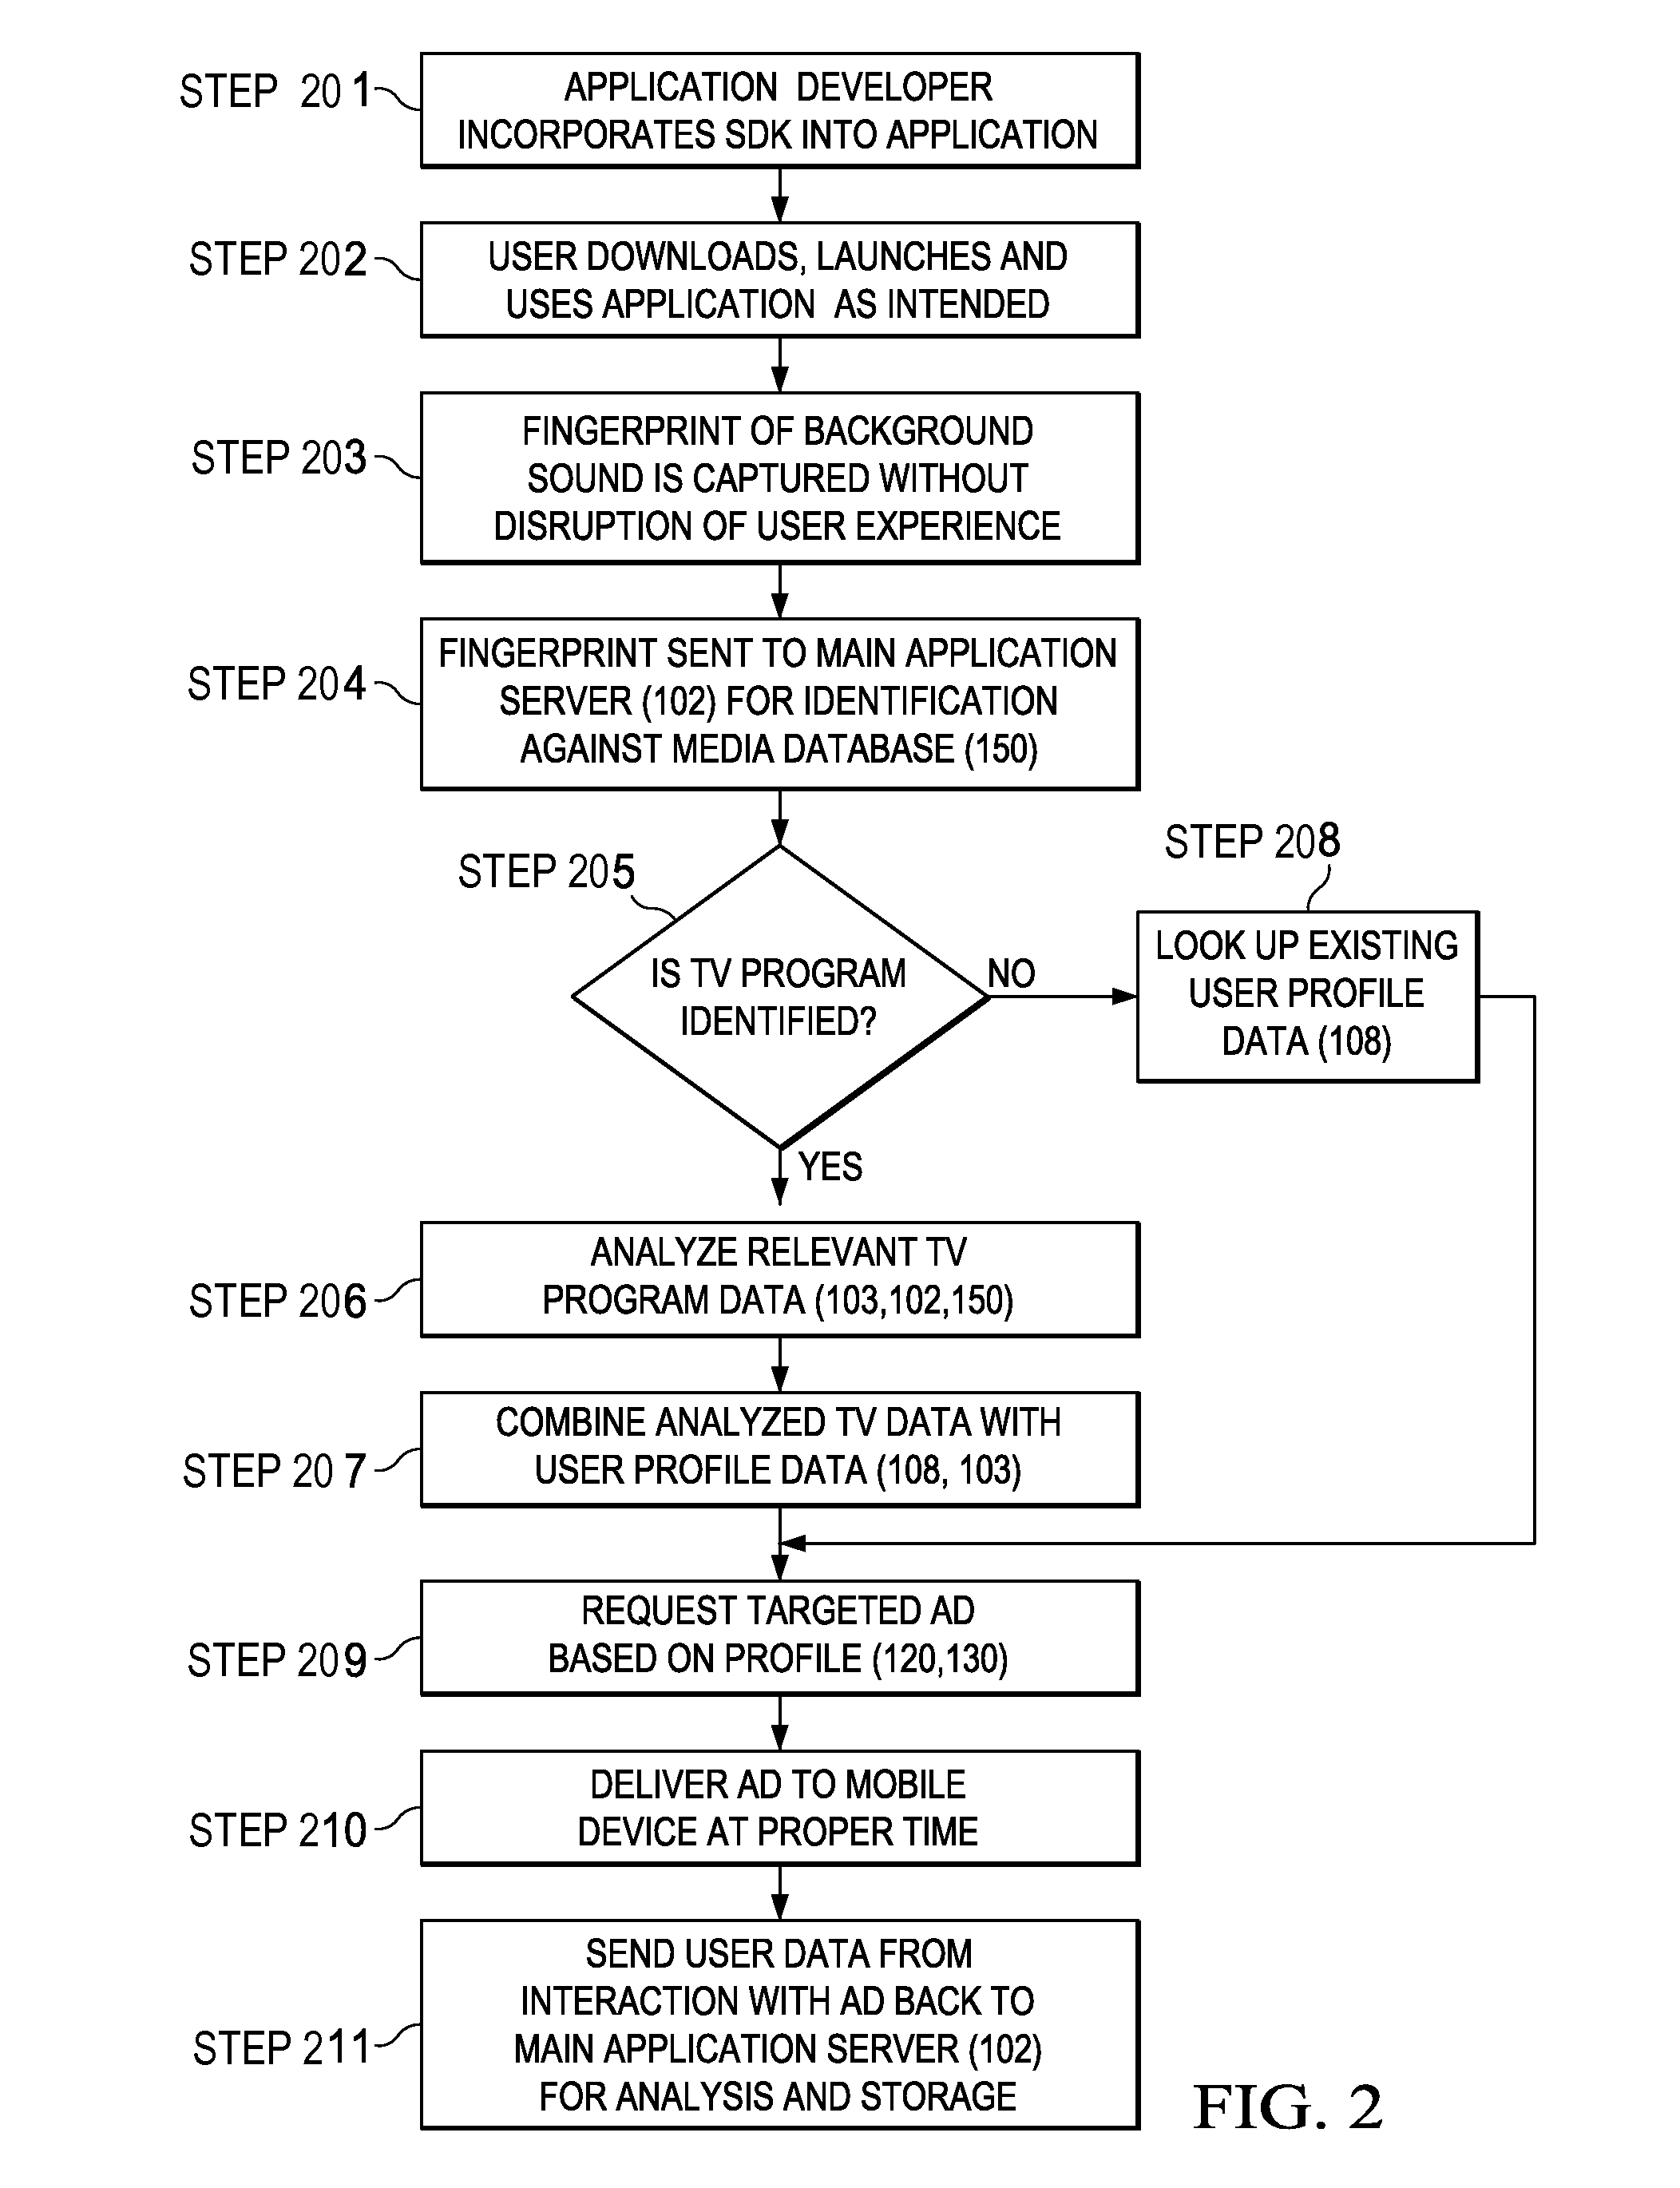 System and method for targeted mobile ad delivery based on consumer TV programming viewing habits